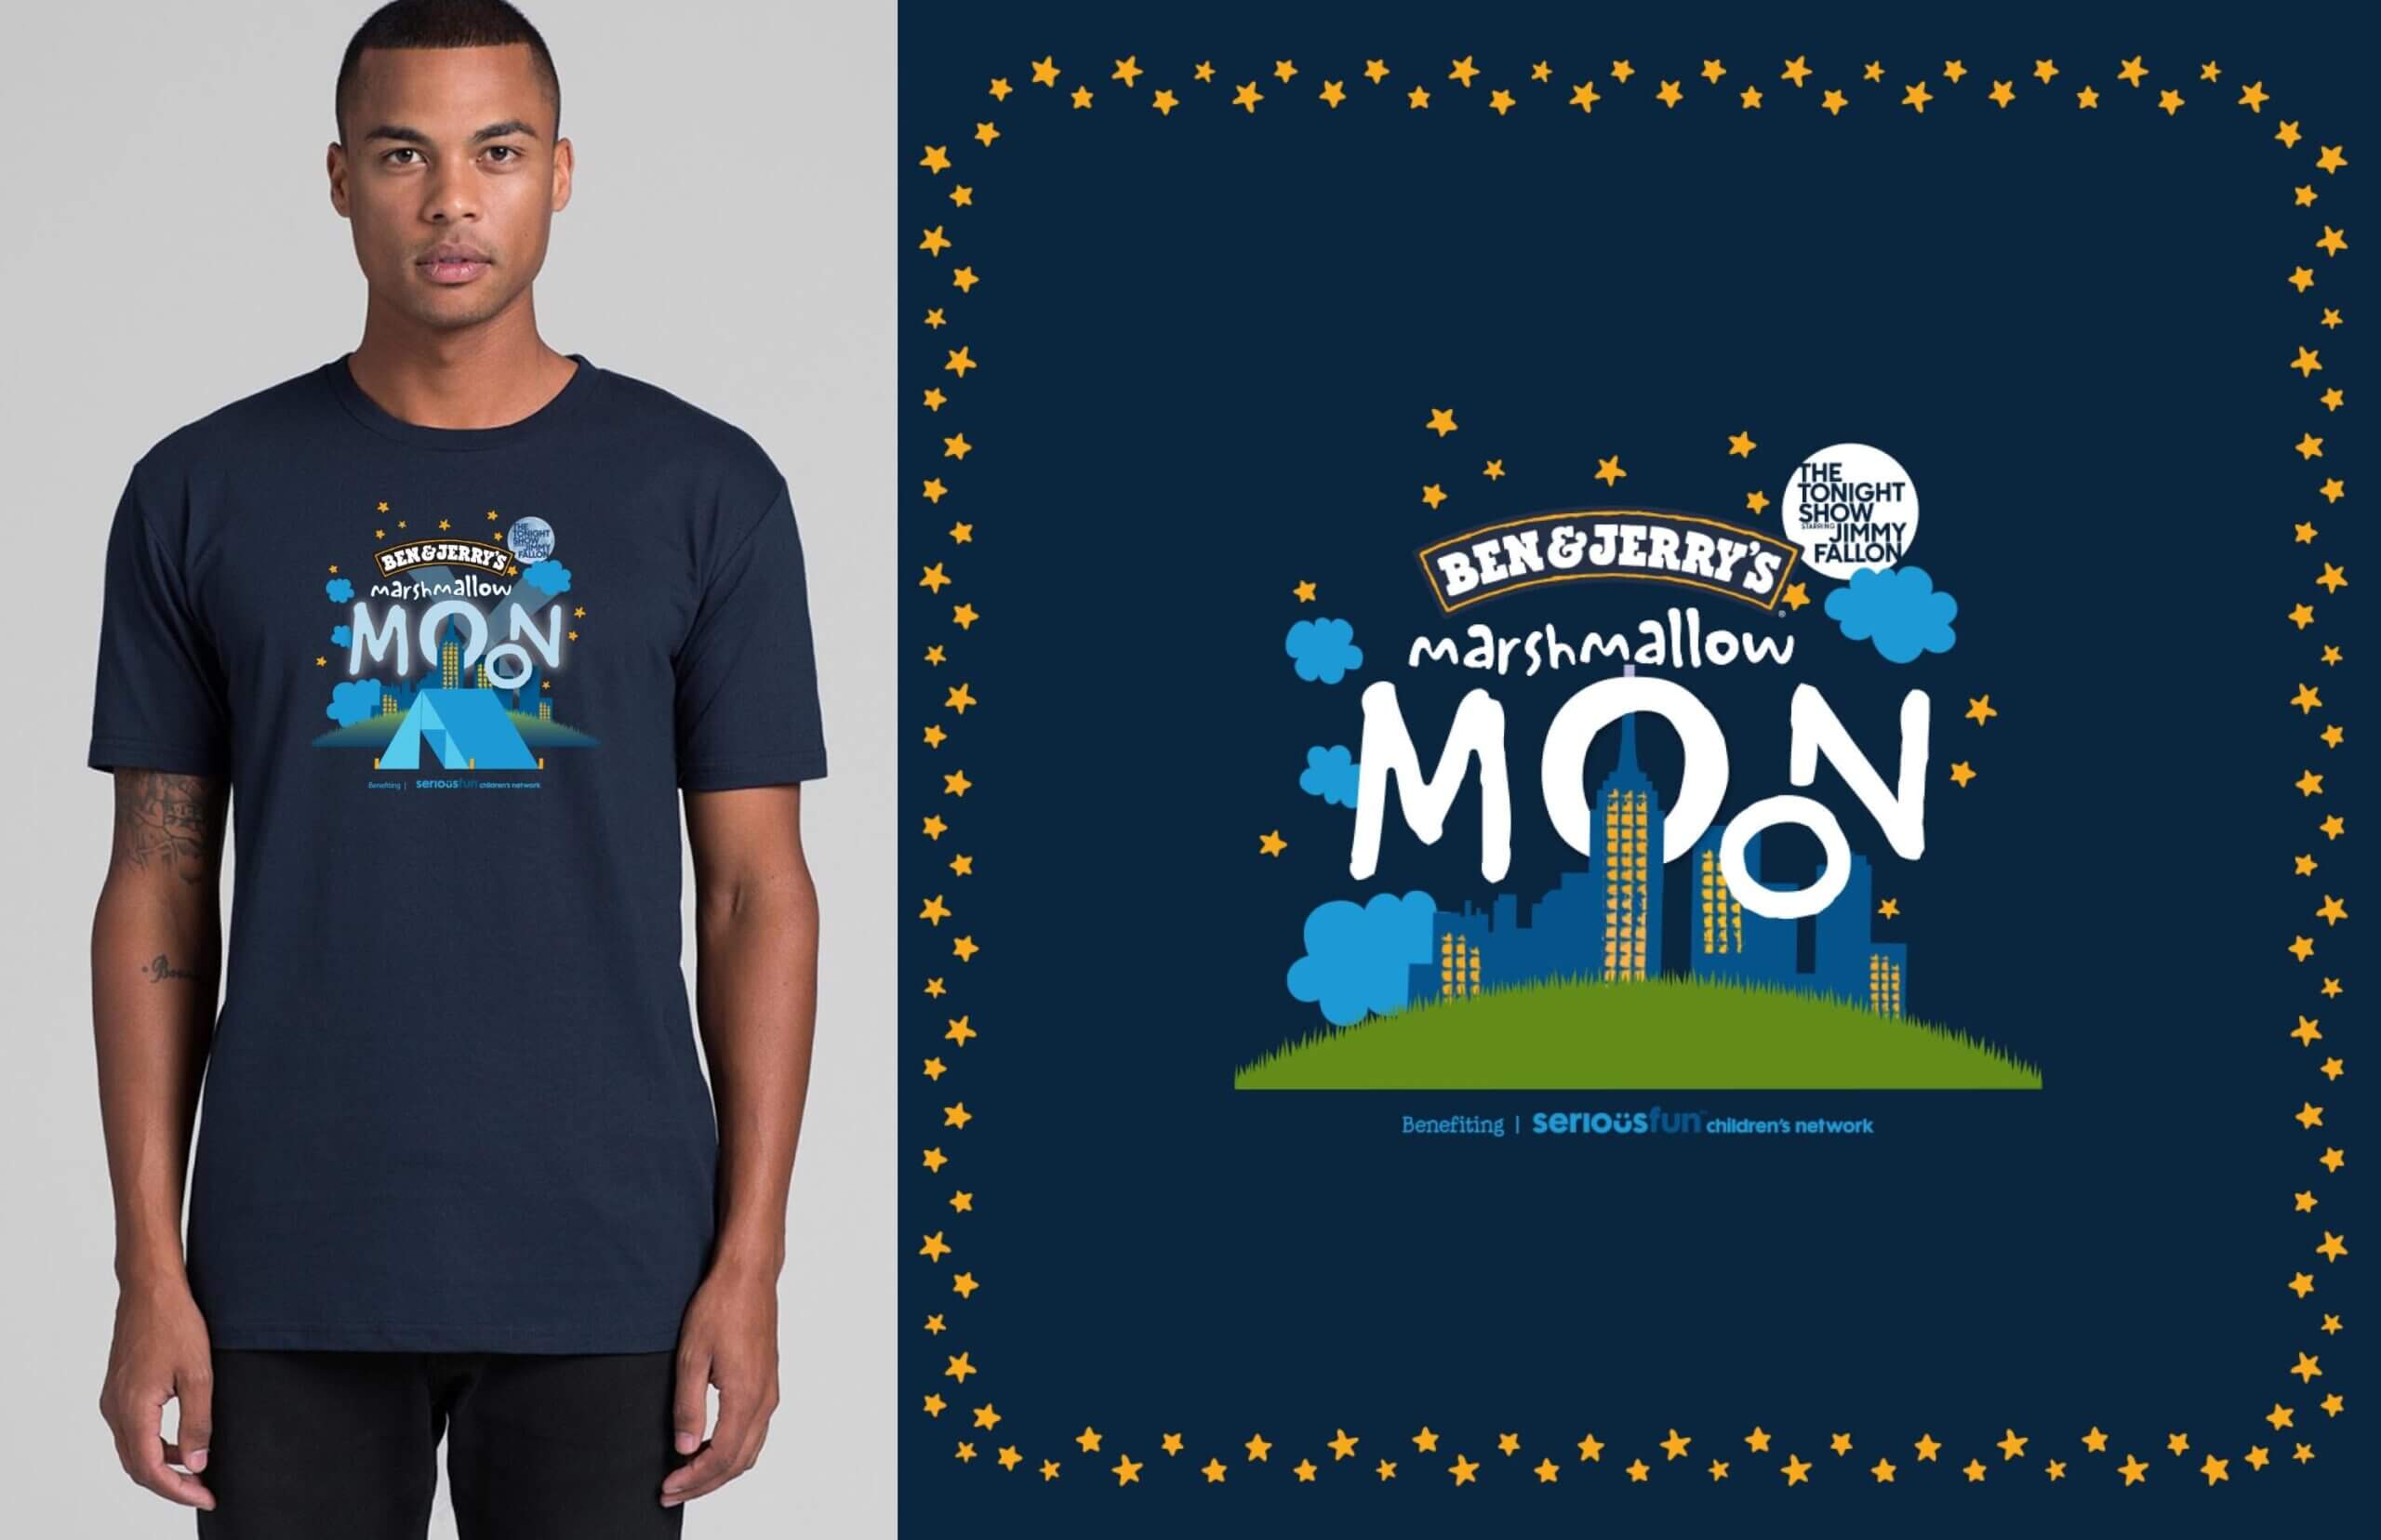 A person wearing a blue tshirt with the words "Marshmallow Moon" written on it